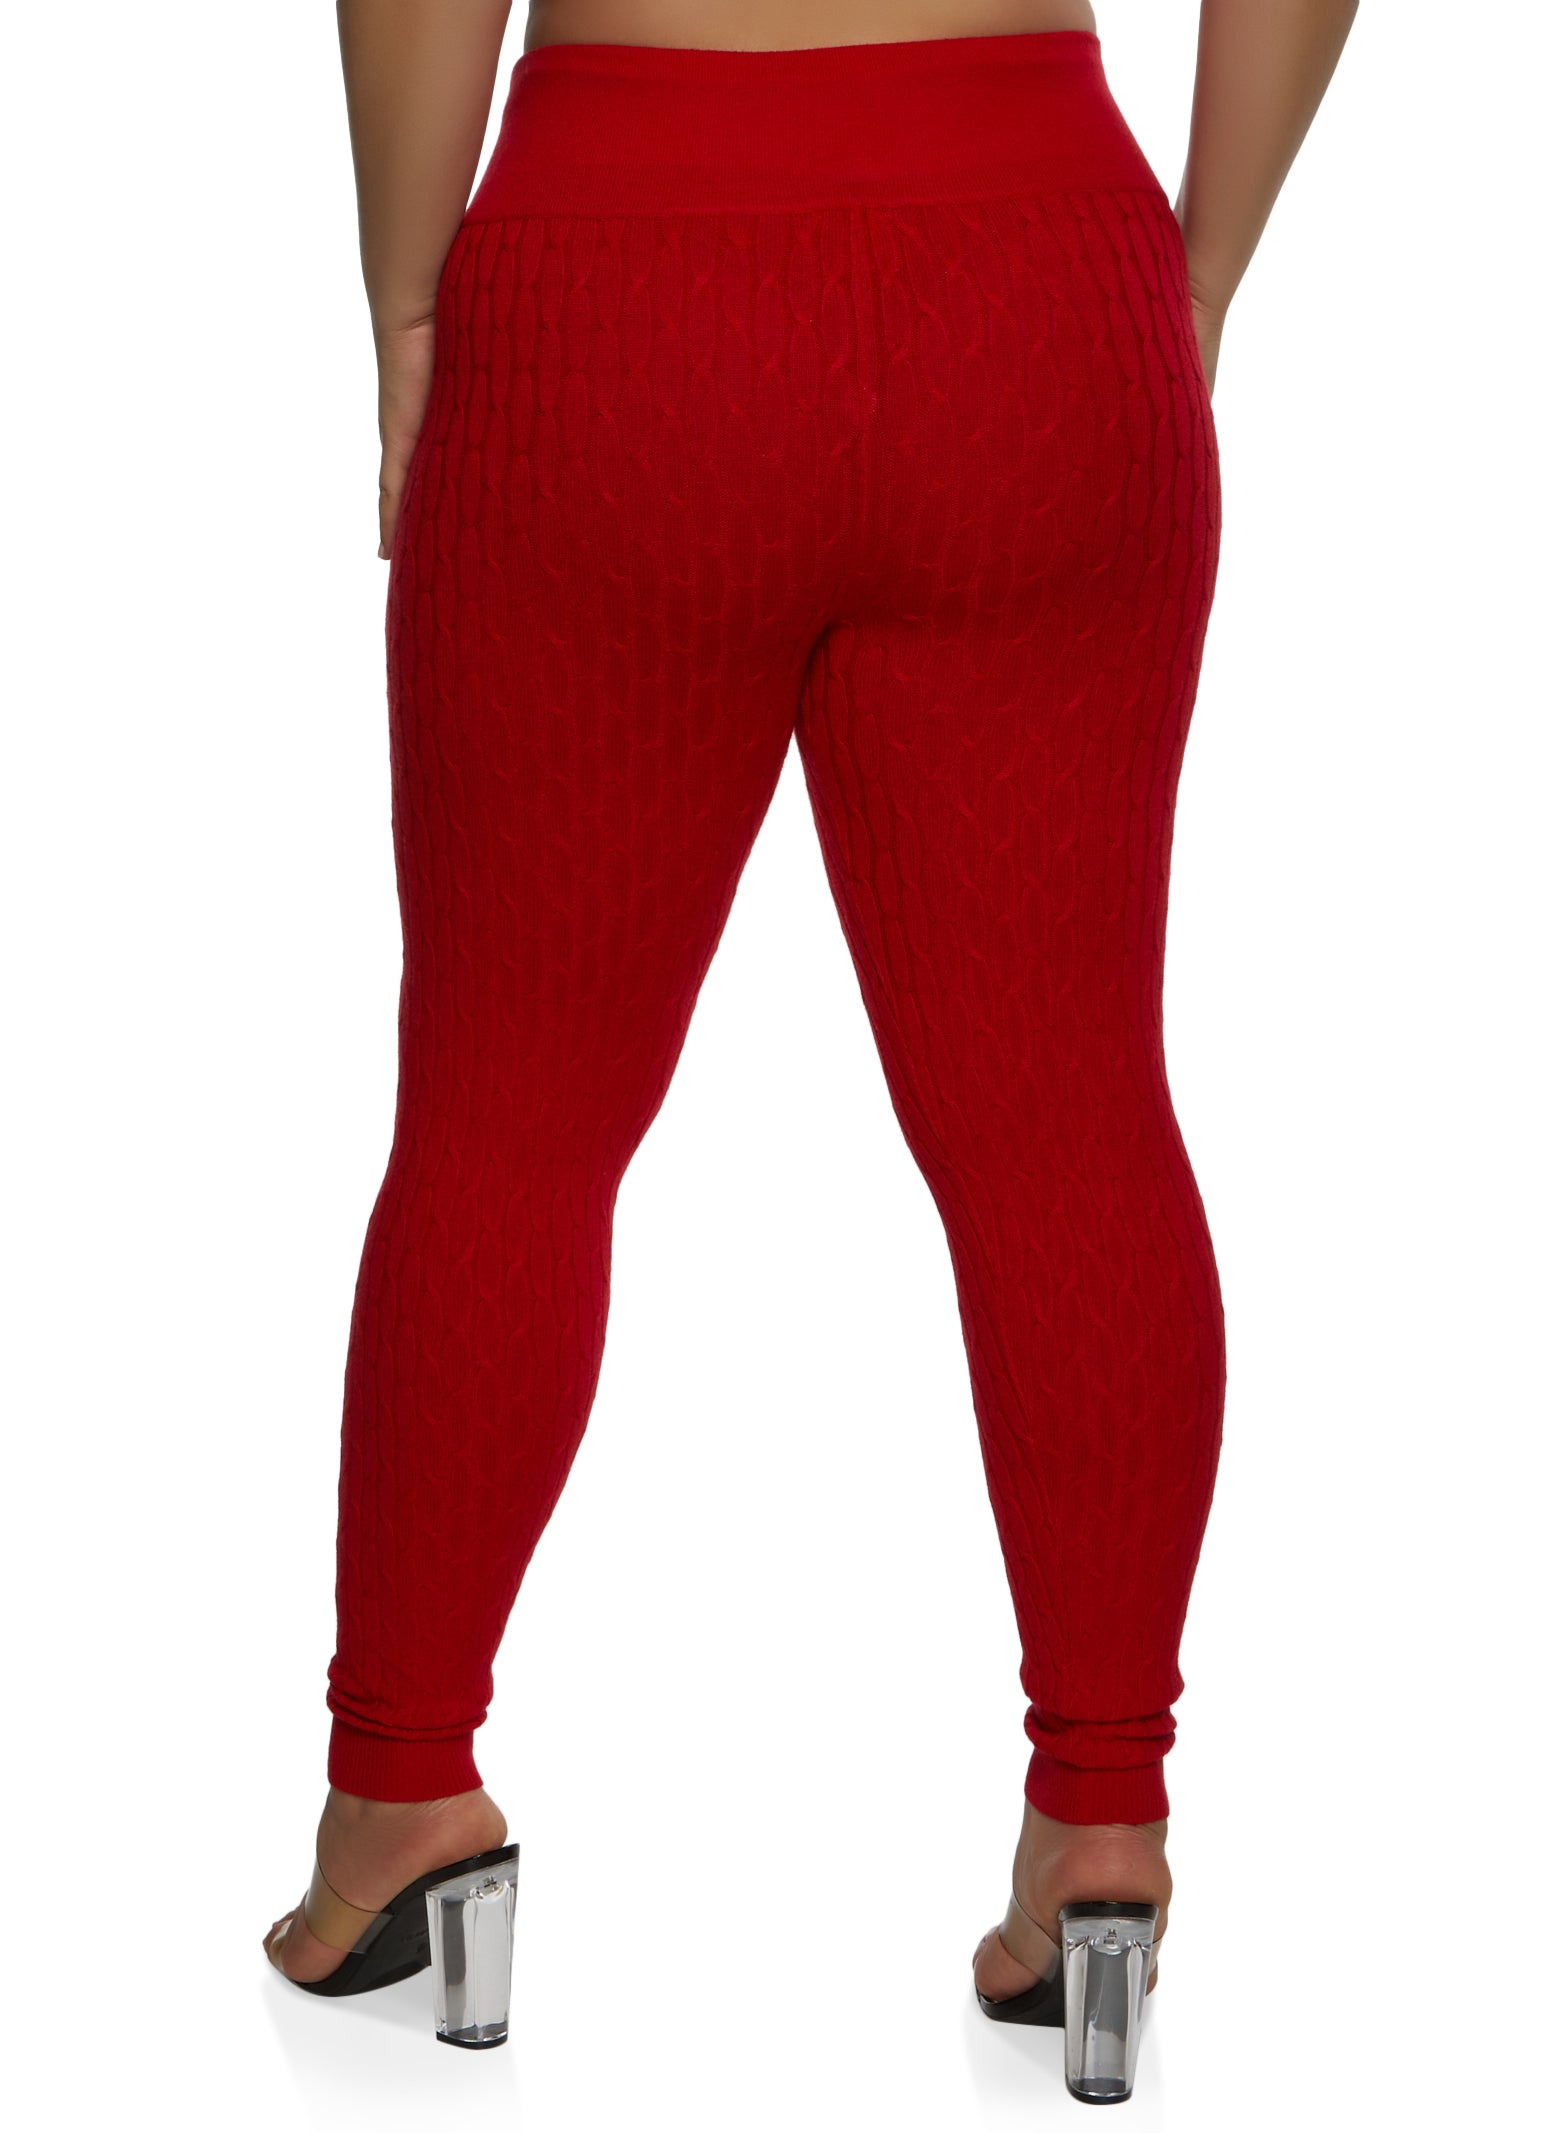 Plus Size Cable Knit Tights 